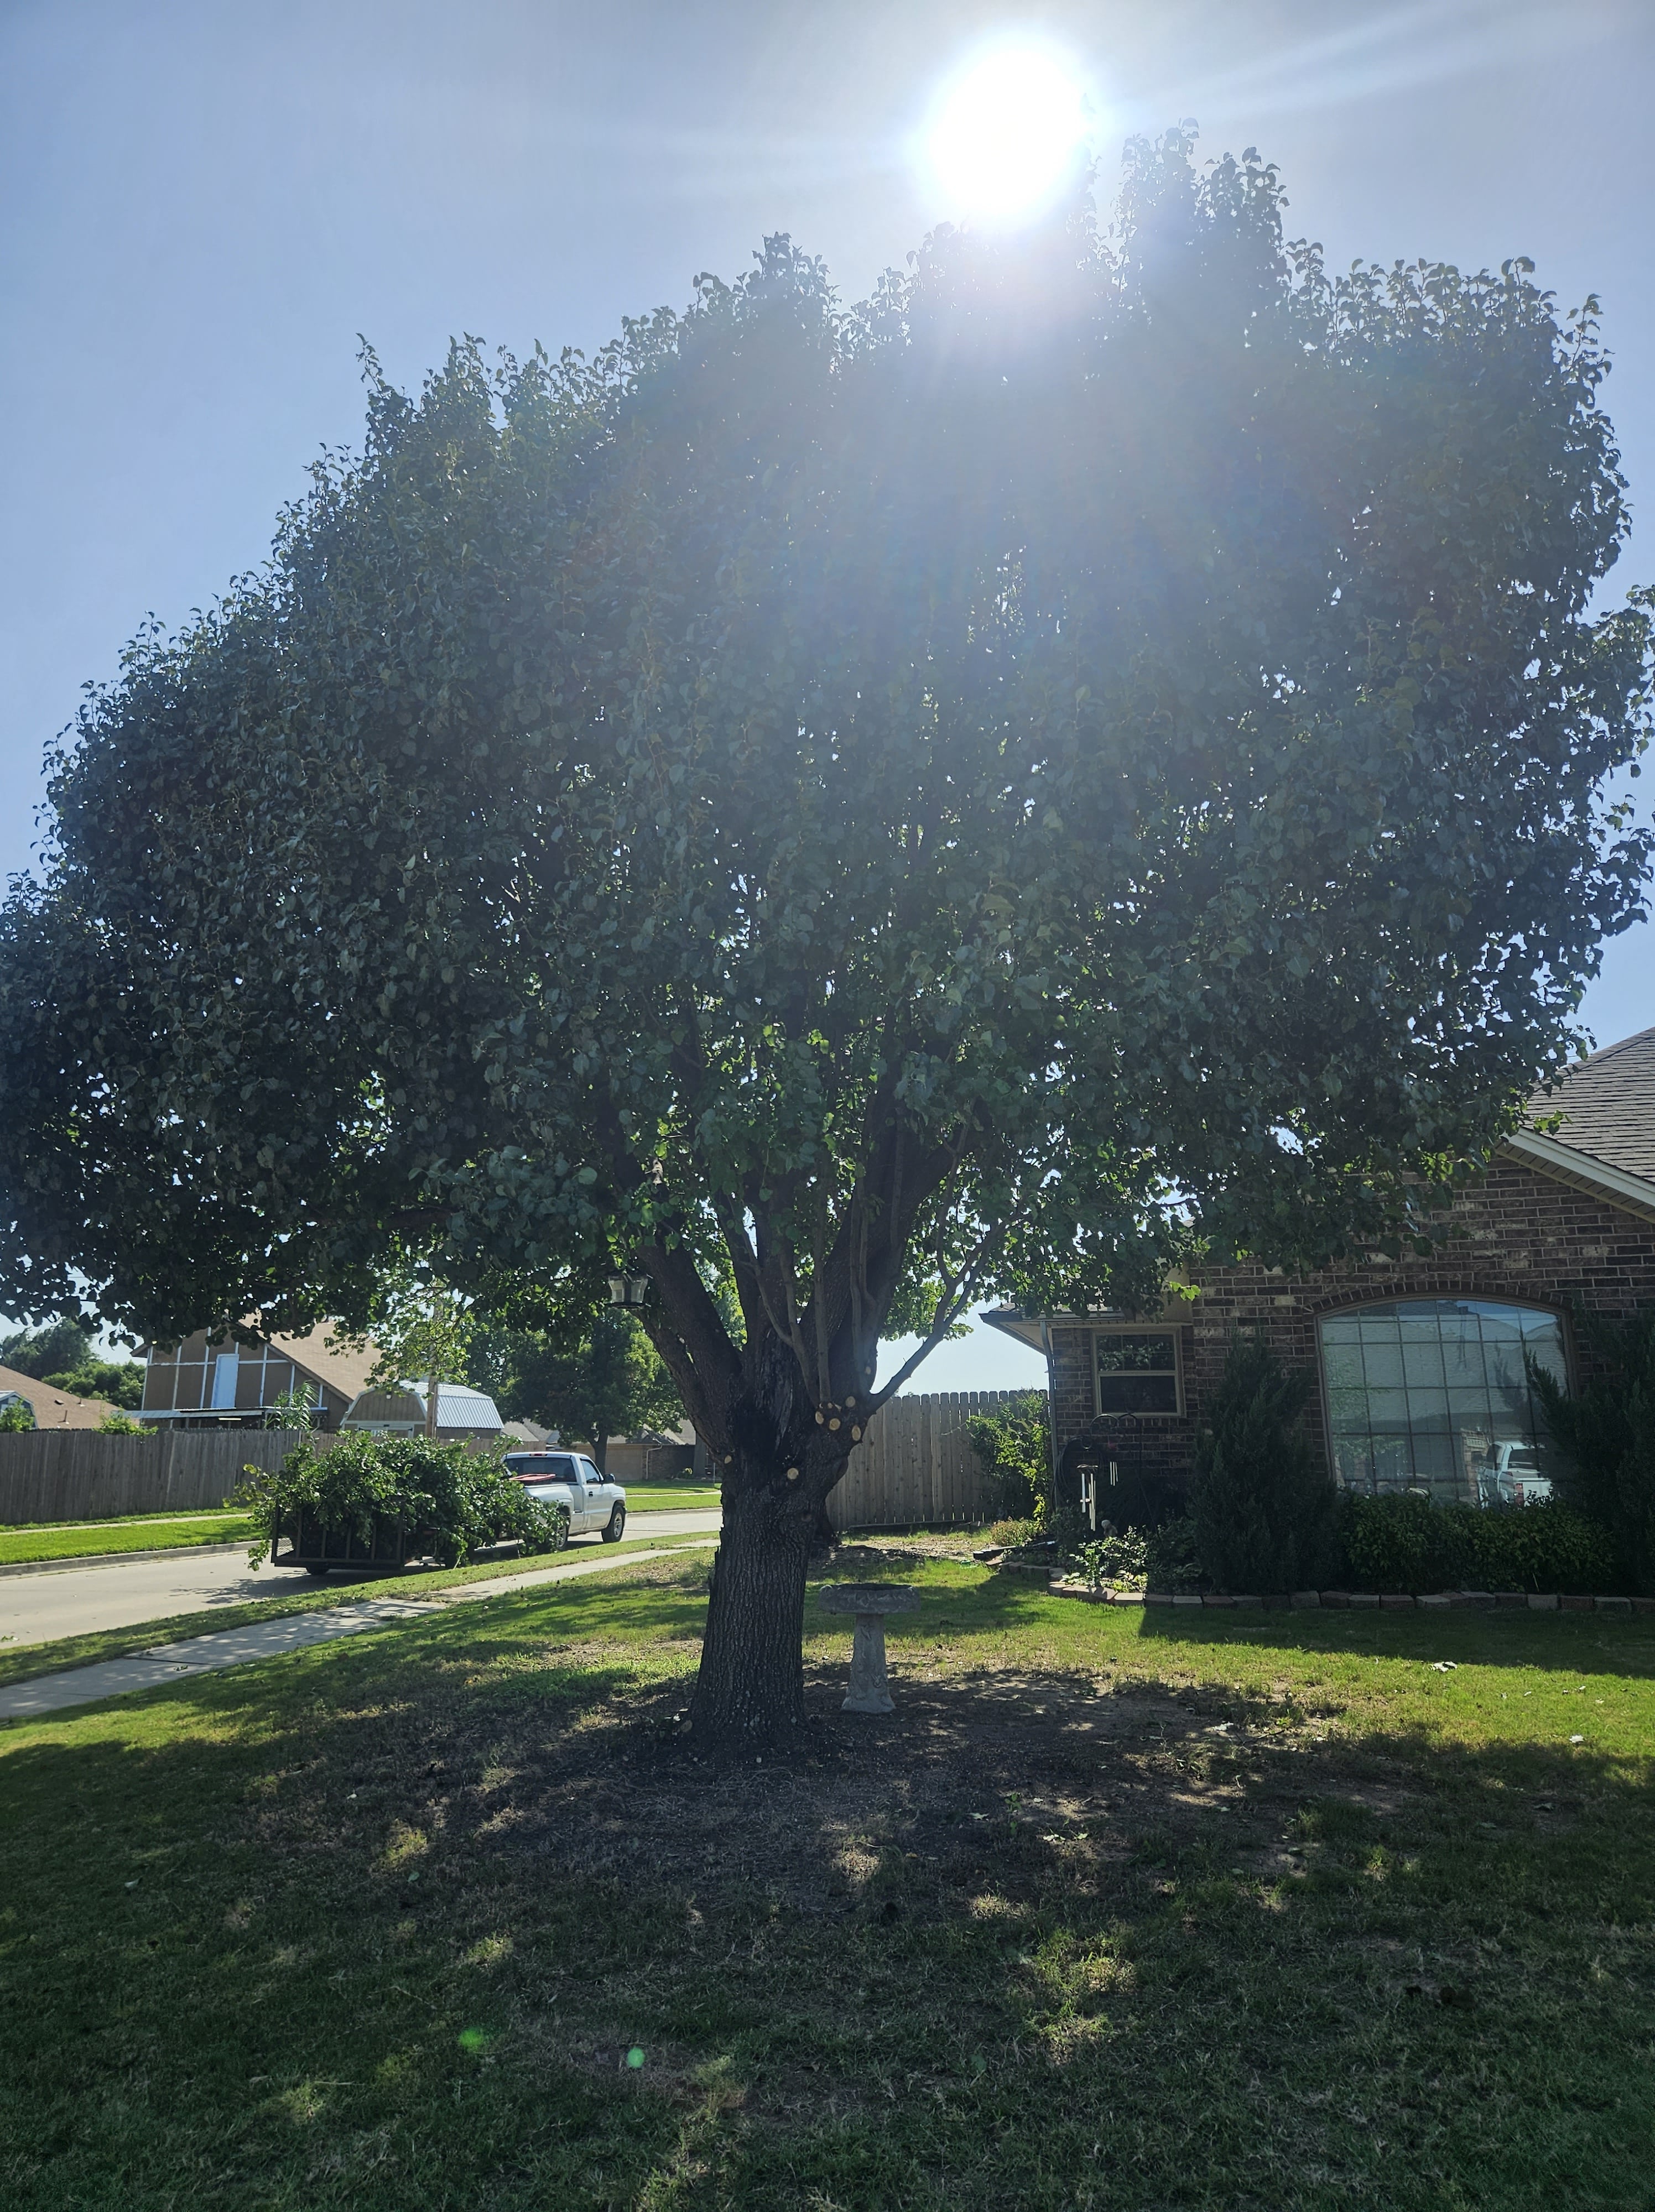 Grass & Trees, LLC Fully Insured Tree Trimming & Pruning Service in Moore, Norman & South OKC